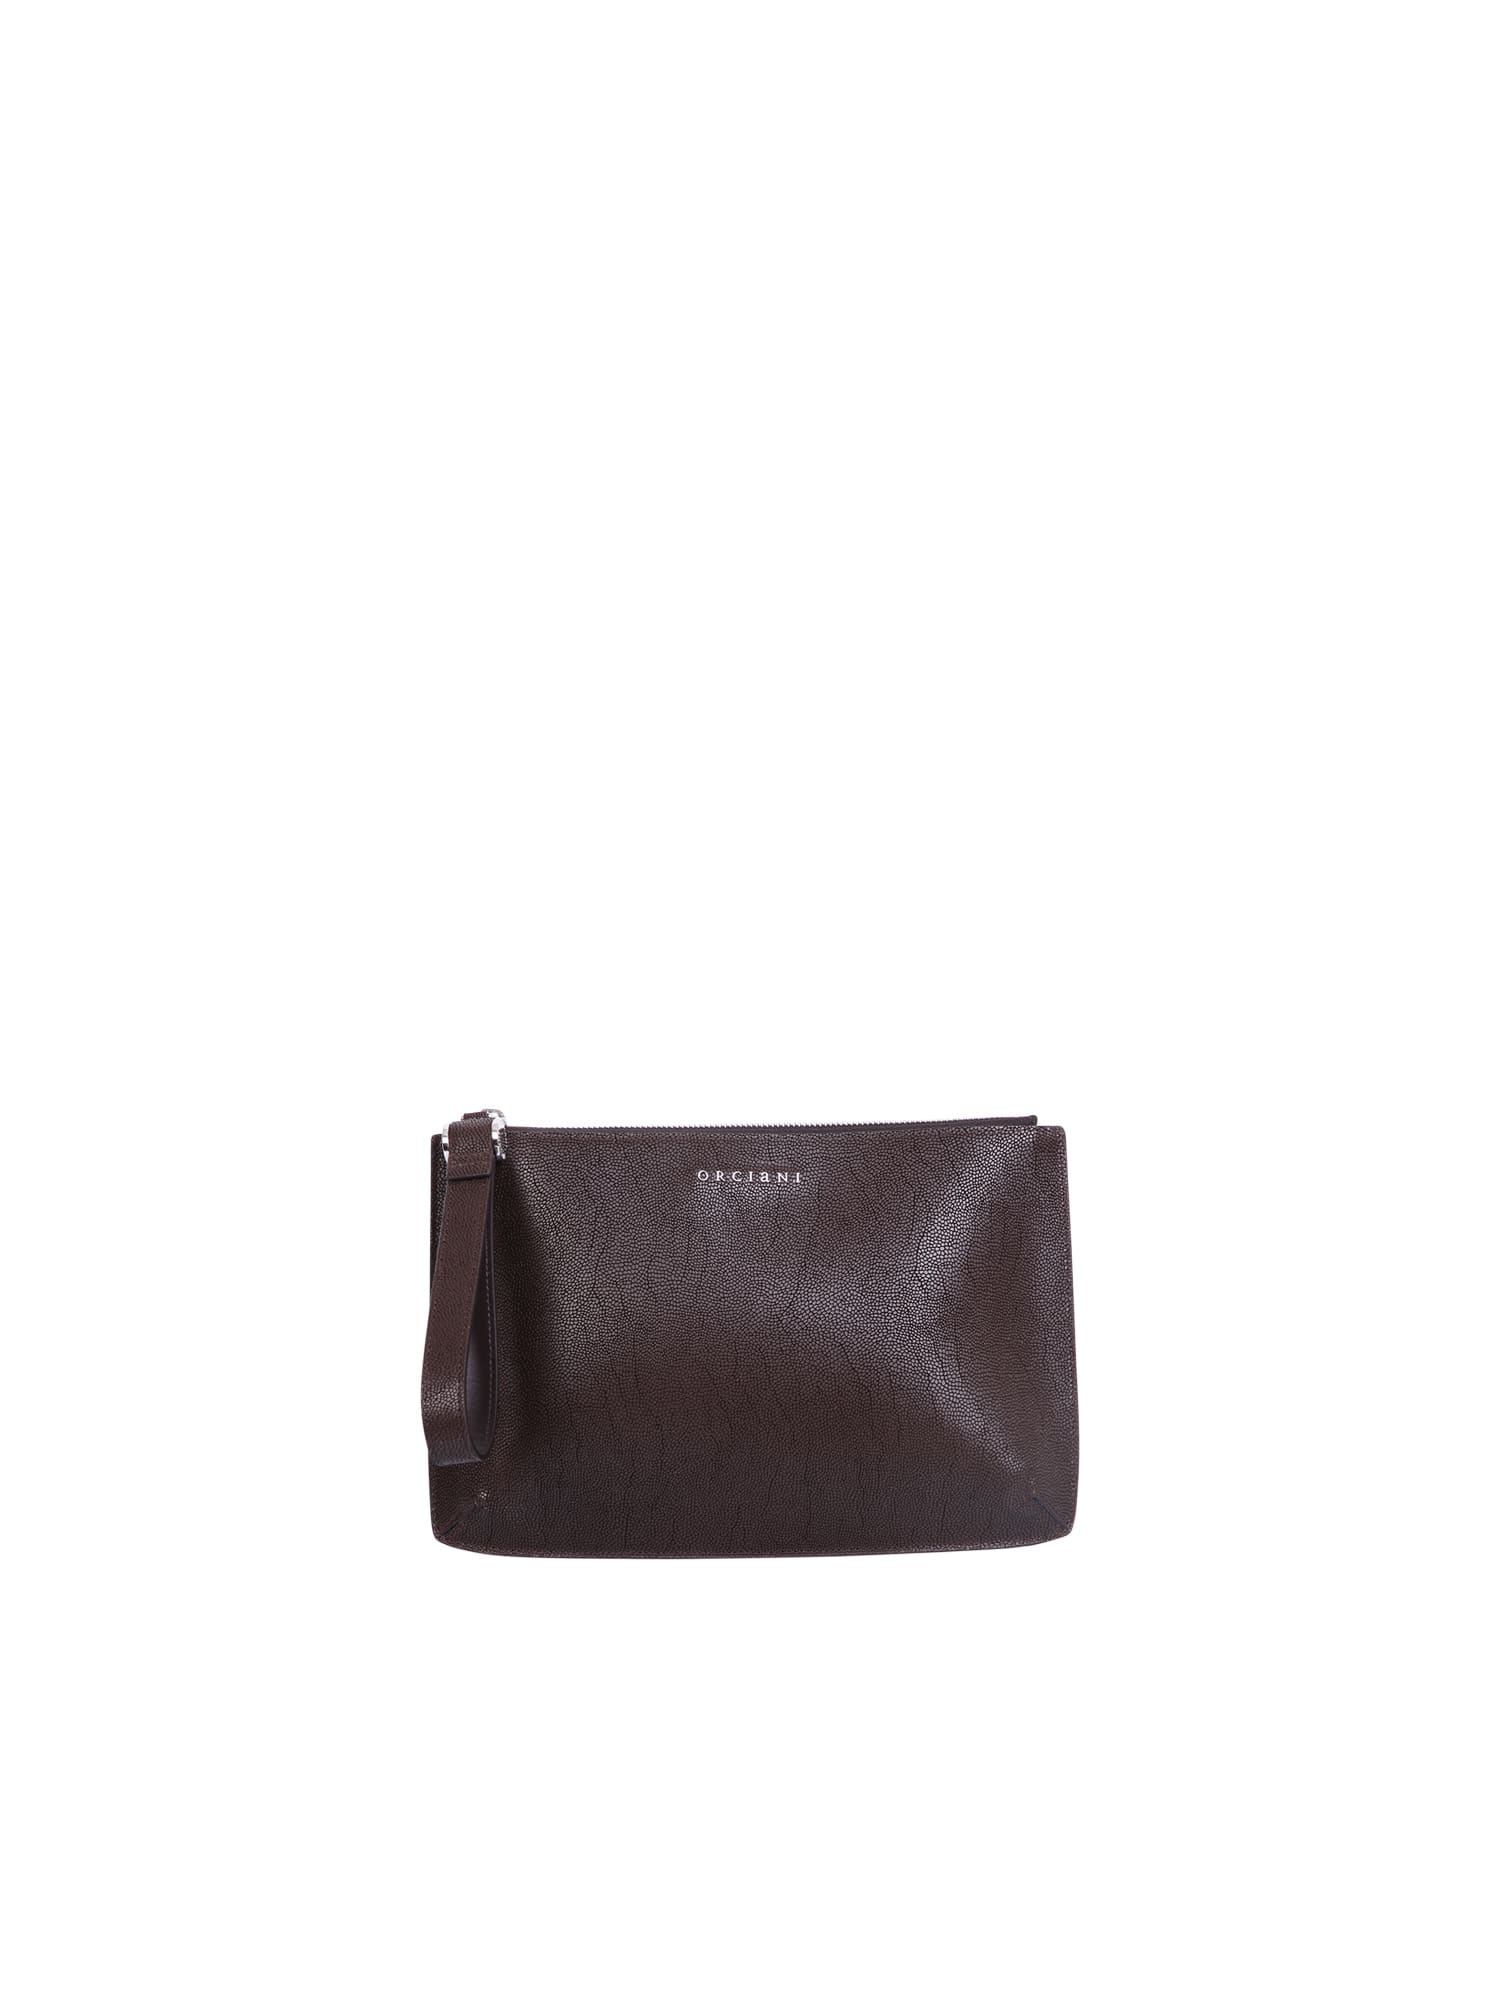 Orciani Leather Pouch Bag